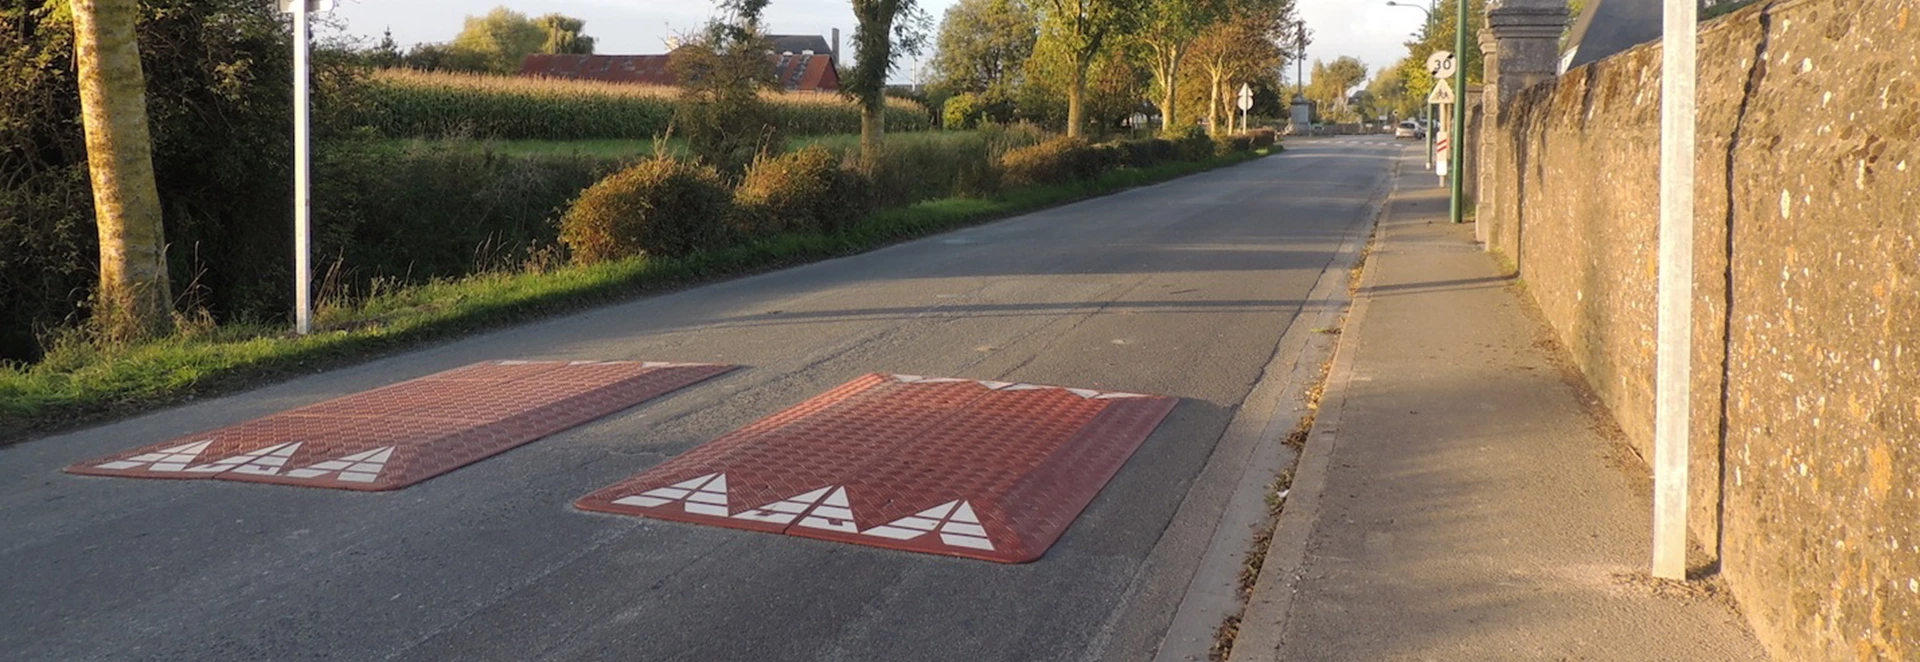 Removing speed bumps “daft and irresponsible”, say campaigners 